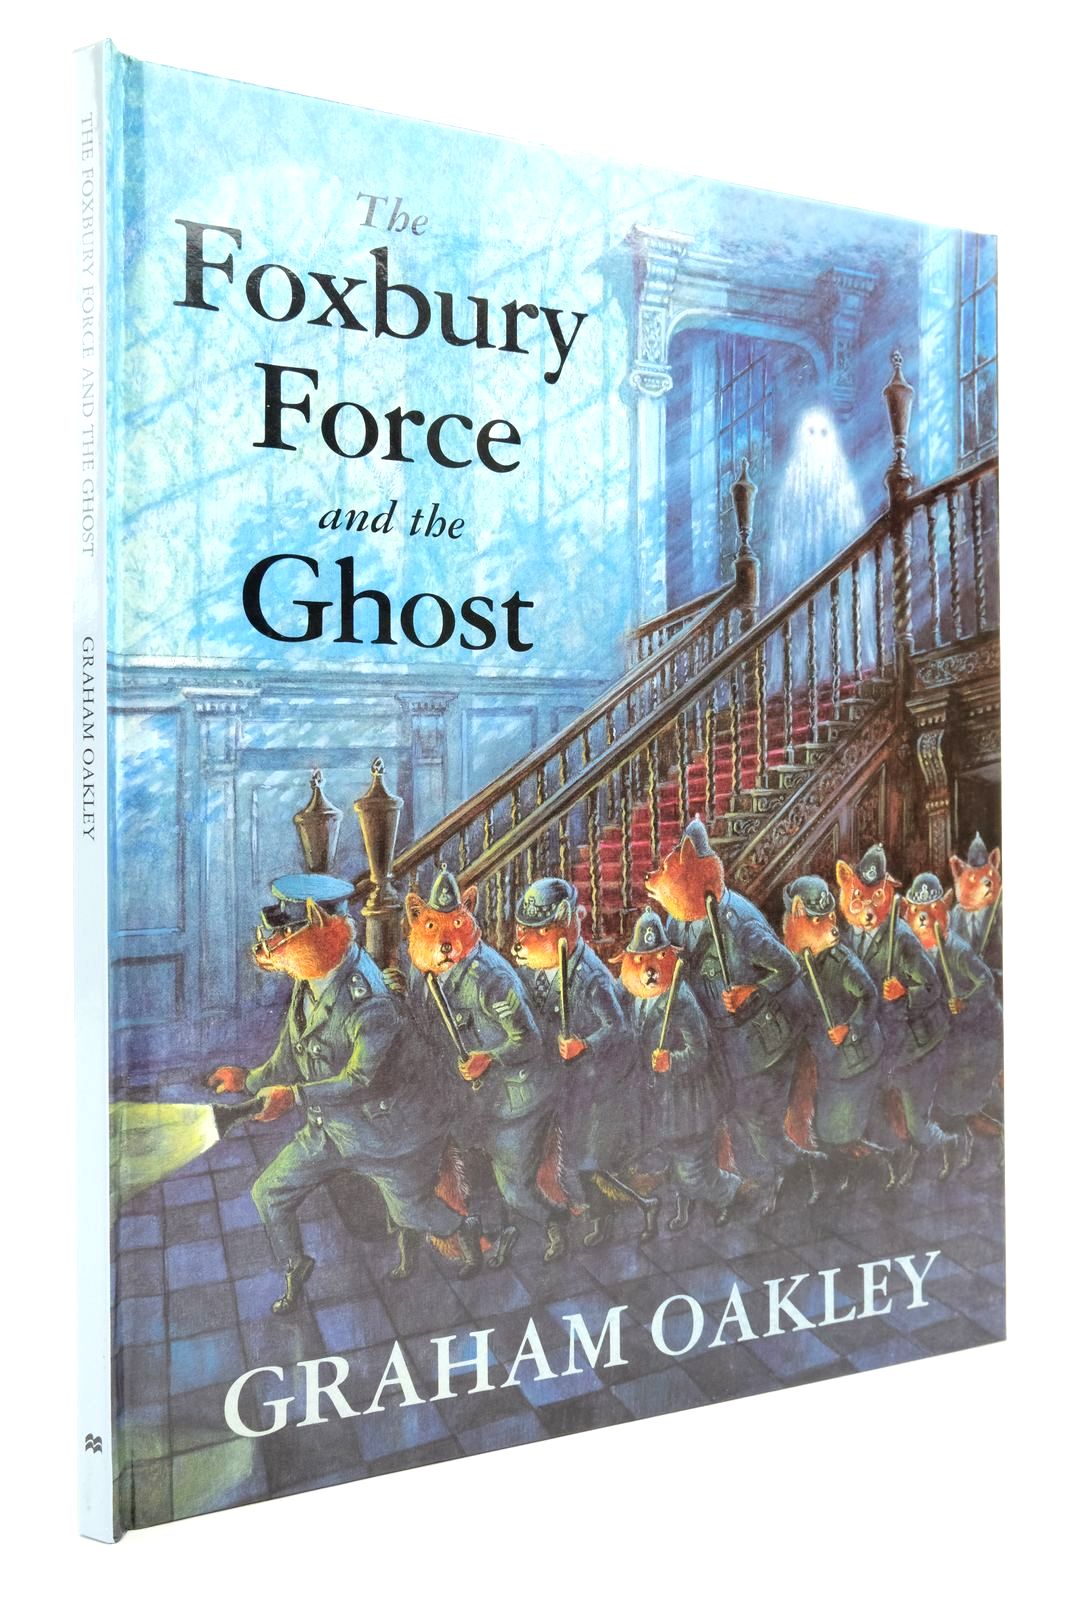 Photo of THE FOXBURY FORCE AND THE GHOST written by Oakley, Graham illustrated by Oakley, Graham published by Macmillan Children's Books (STOCK CODE: 2138623)  for sale by Stella & Rose's Books